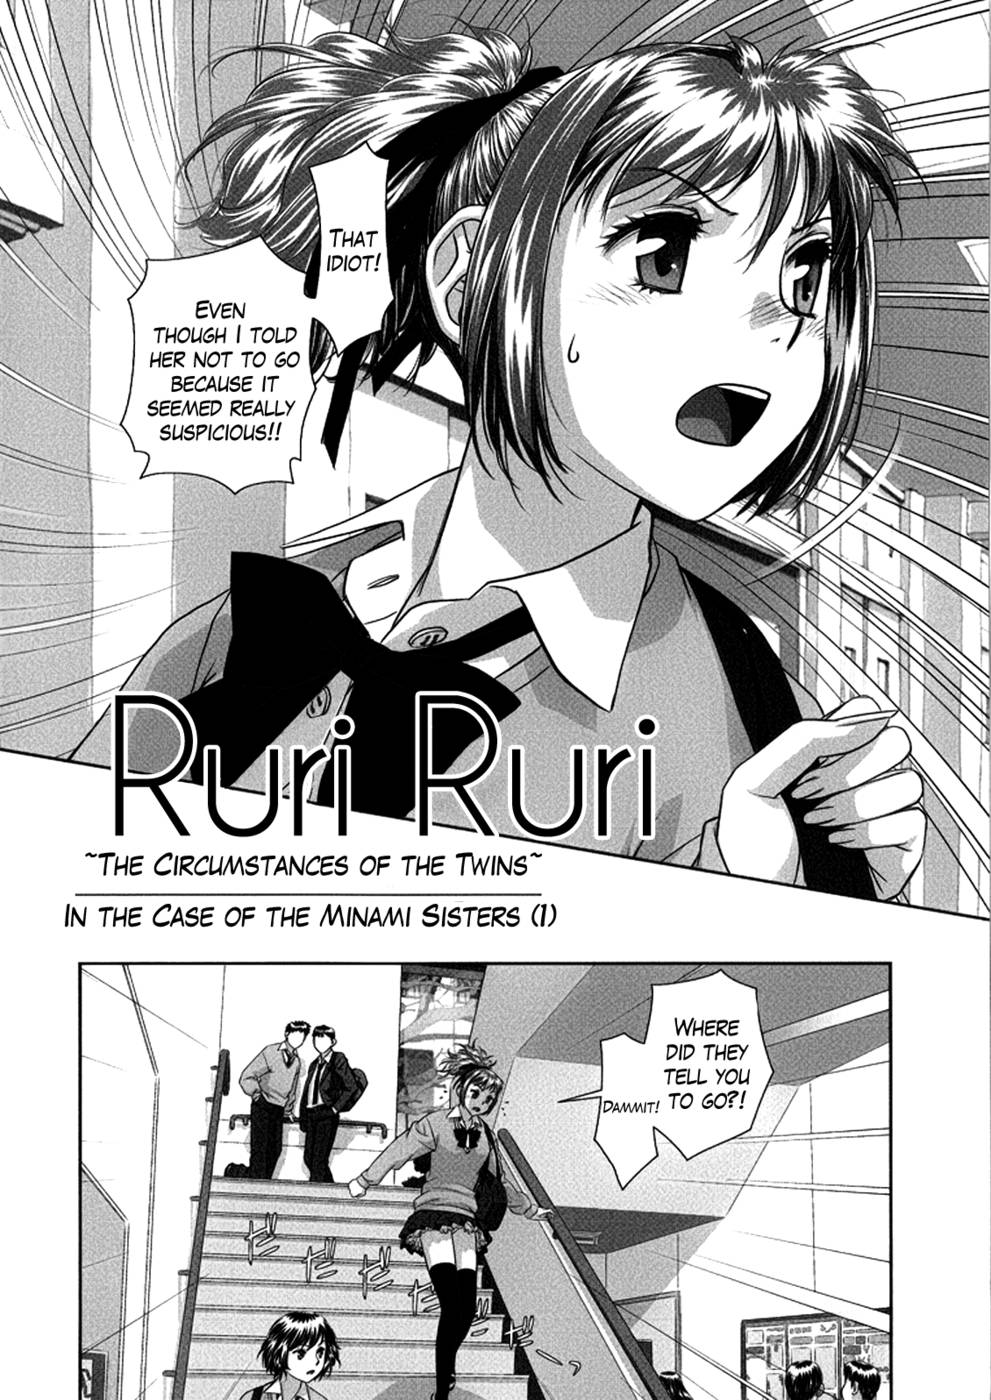 Hentai Manga Comic-Ruri Ruri-Chapter 7-The Circumstances Of The Twins- In The Case Of The Minami Sisters 1-2